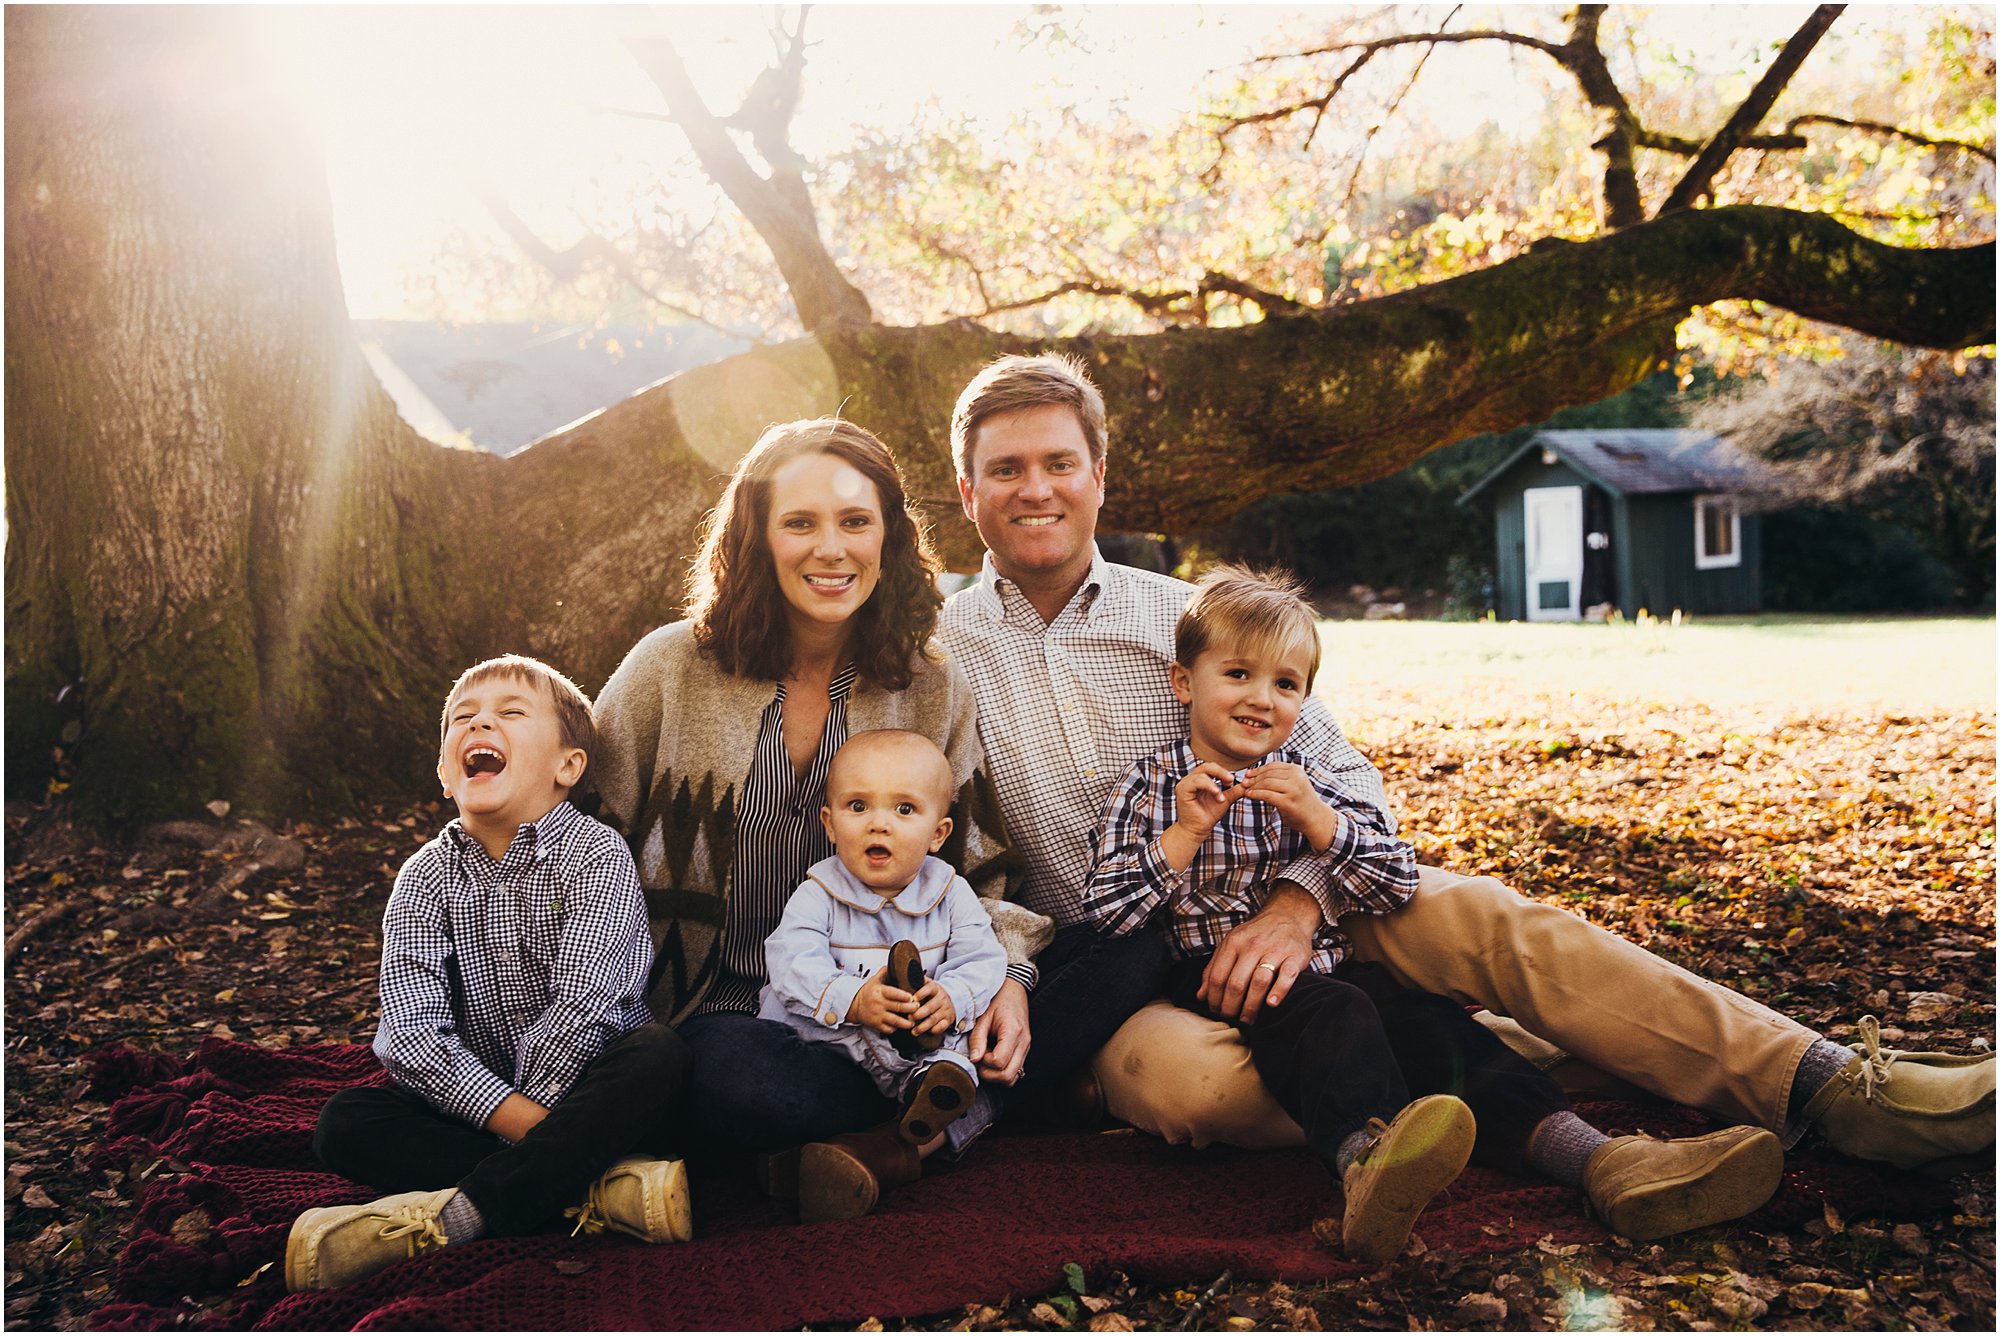 Couple with their three young boys cuddled on blanket and smiling at camera